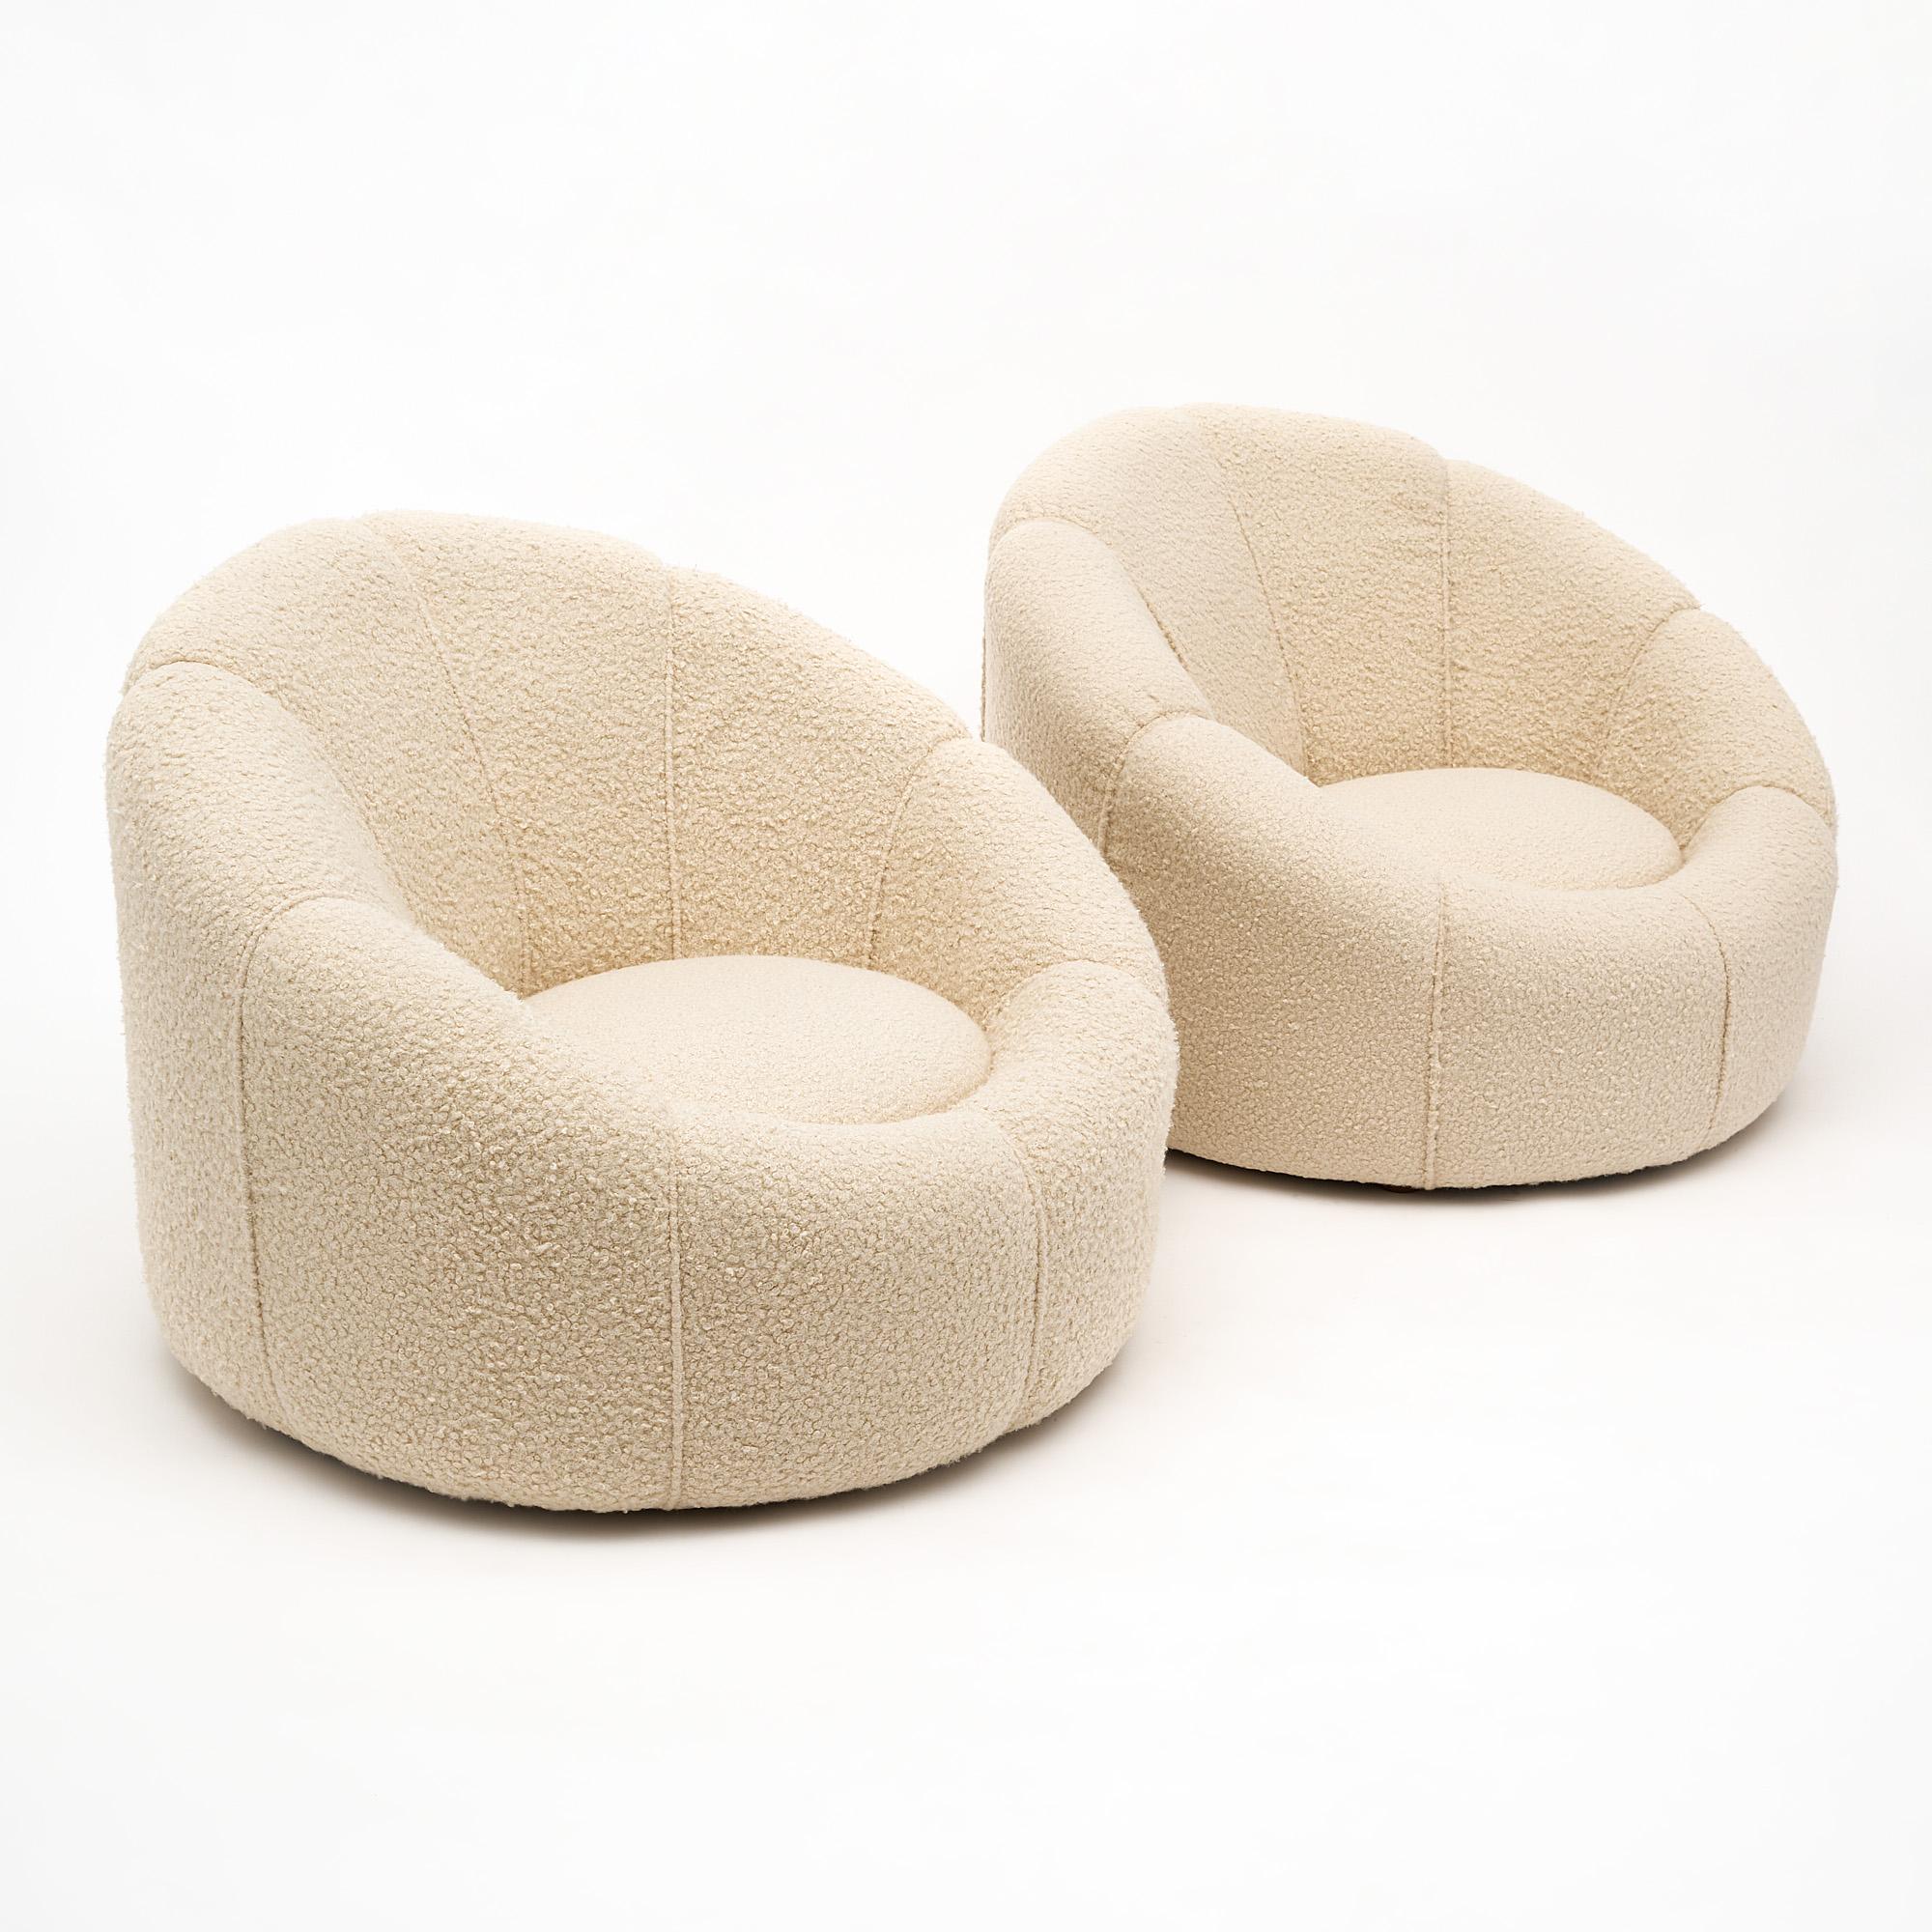 Pair of custom armchairs from Italy made in the modernist style with strong frames and a new “bouclé” wool blend upholstery. The pair is comfortable and plush, we love the design and presence of this pair.